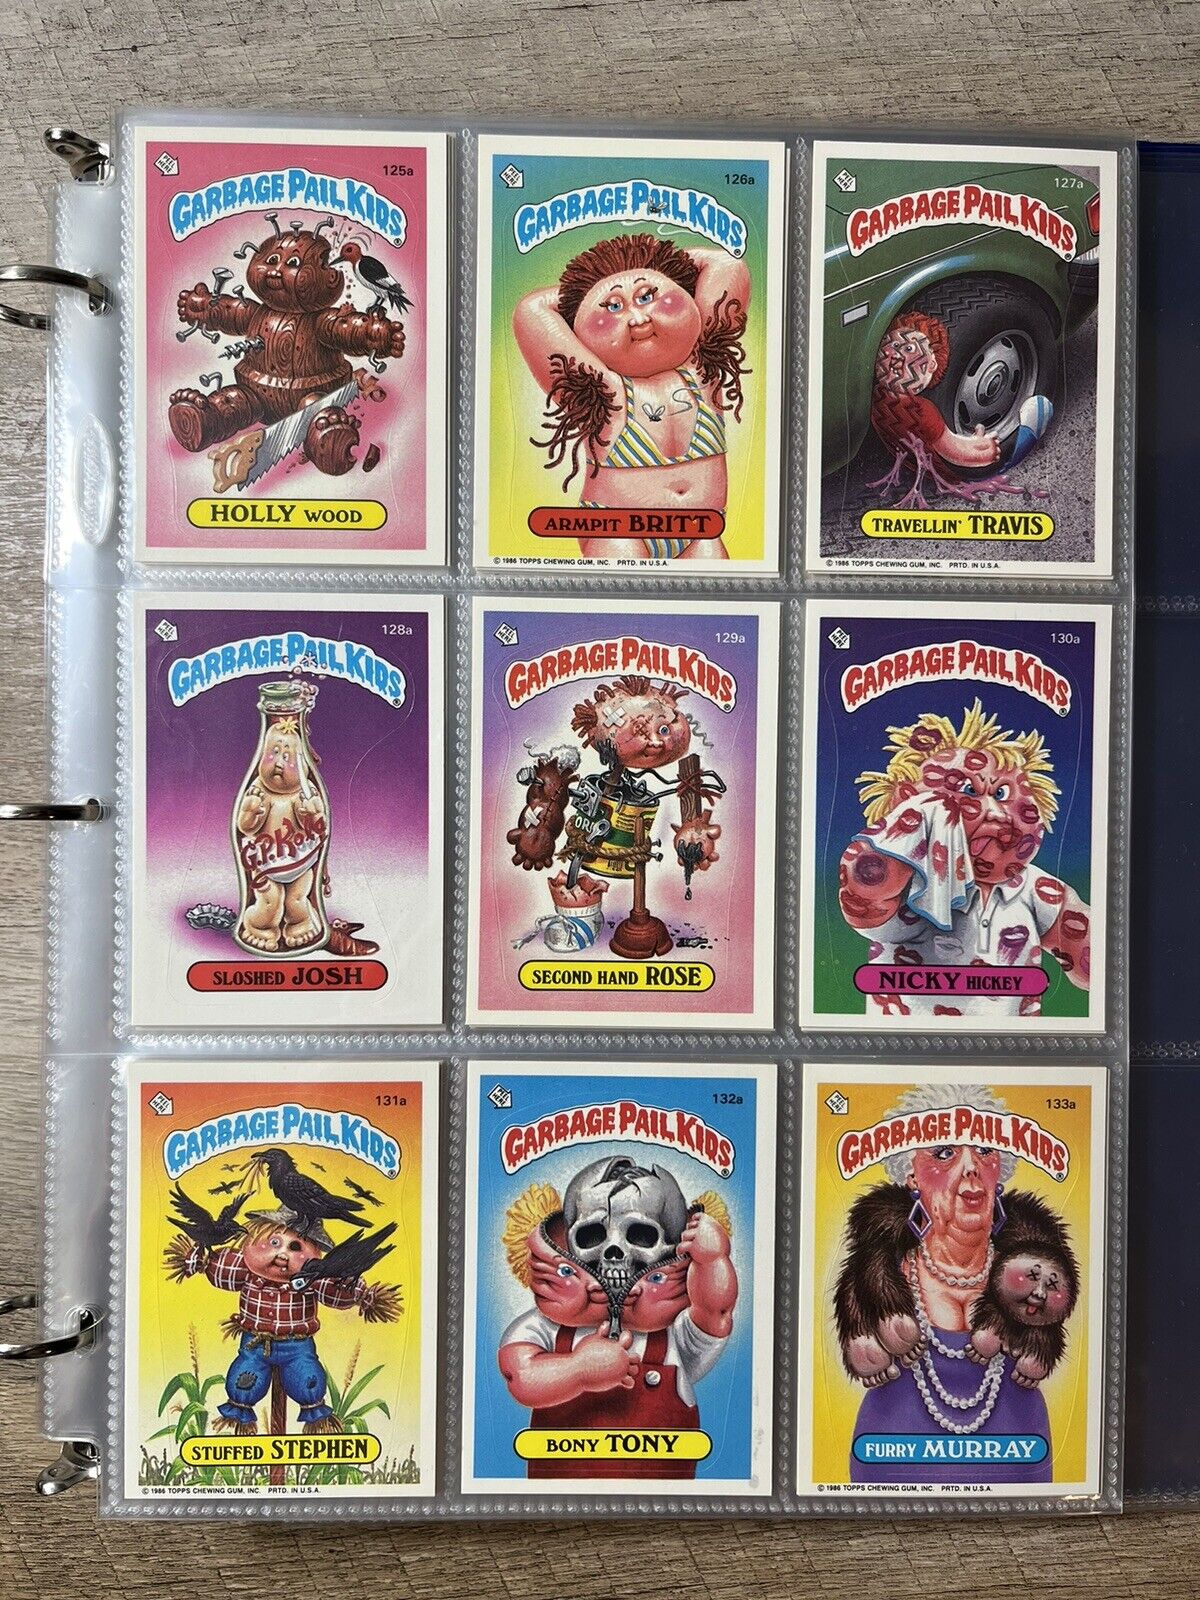 1986 TOPPS GARBAGE PAIL KIDS Series 4 OS4 GPK Glossy Complete Set 80 Base Cards